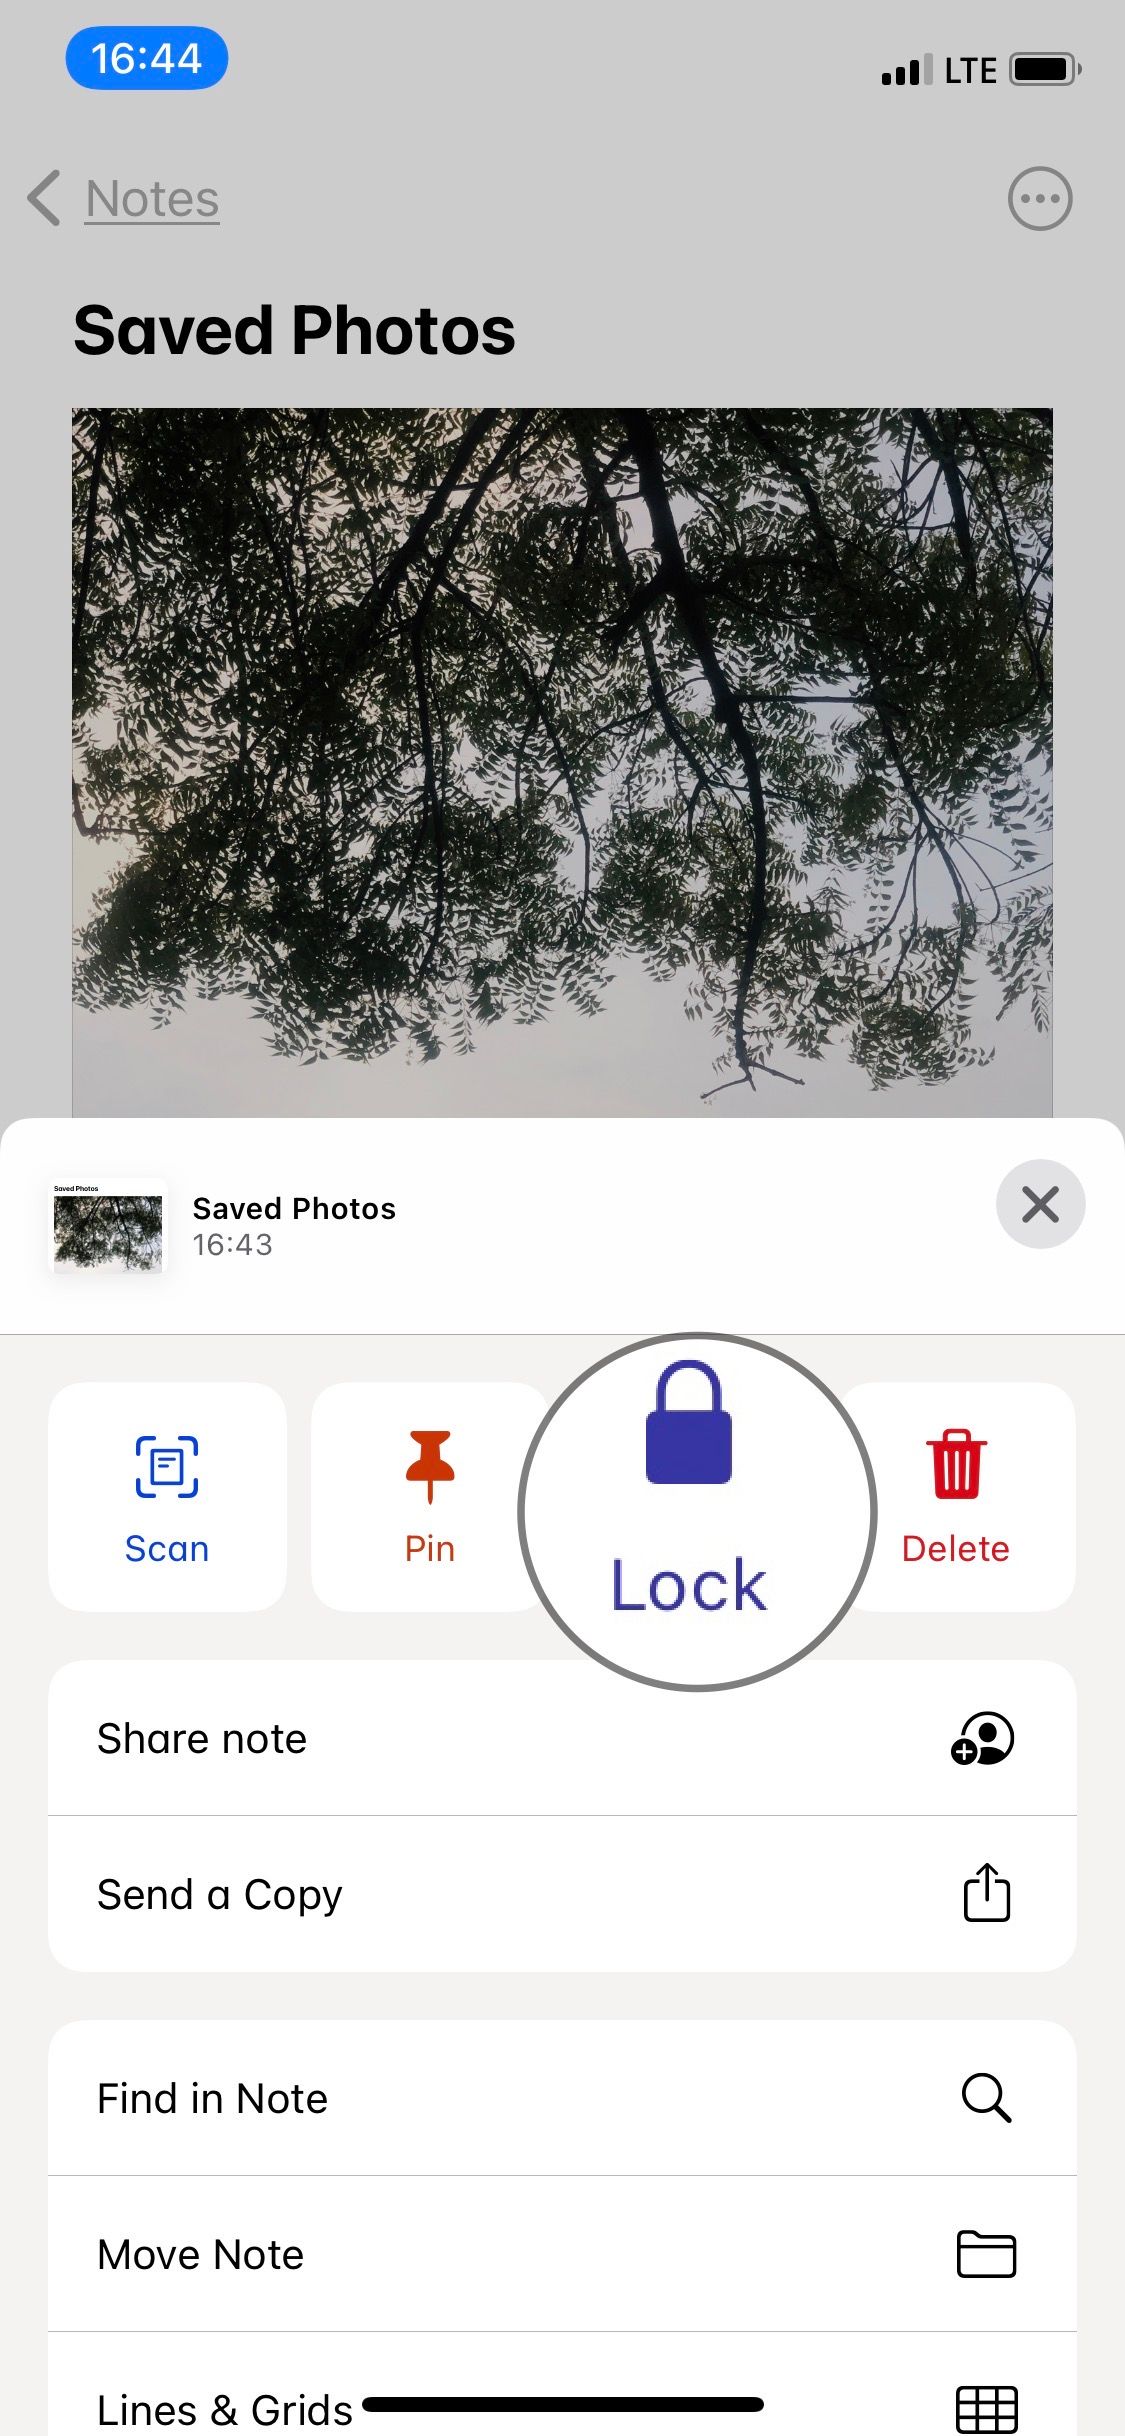 Option to Lock notes in the iphone Notes app.